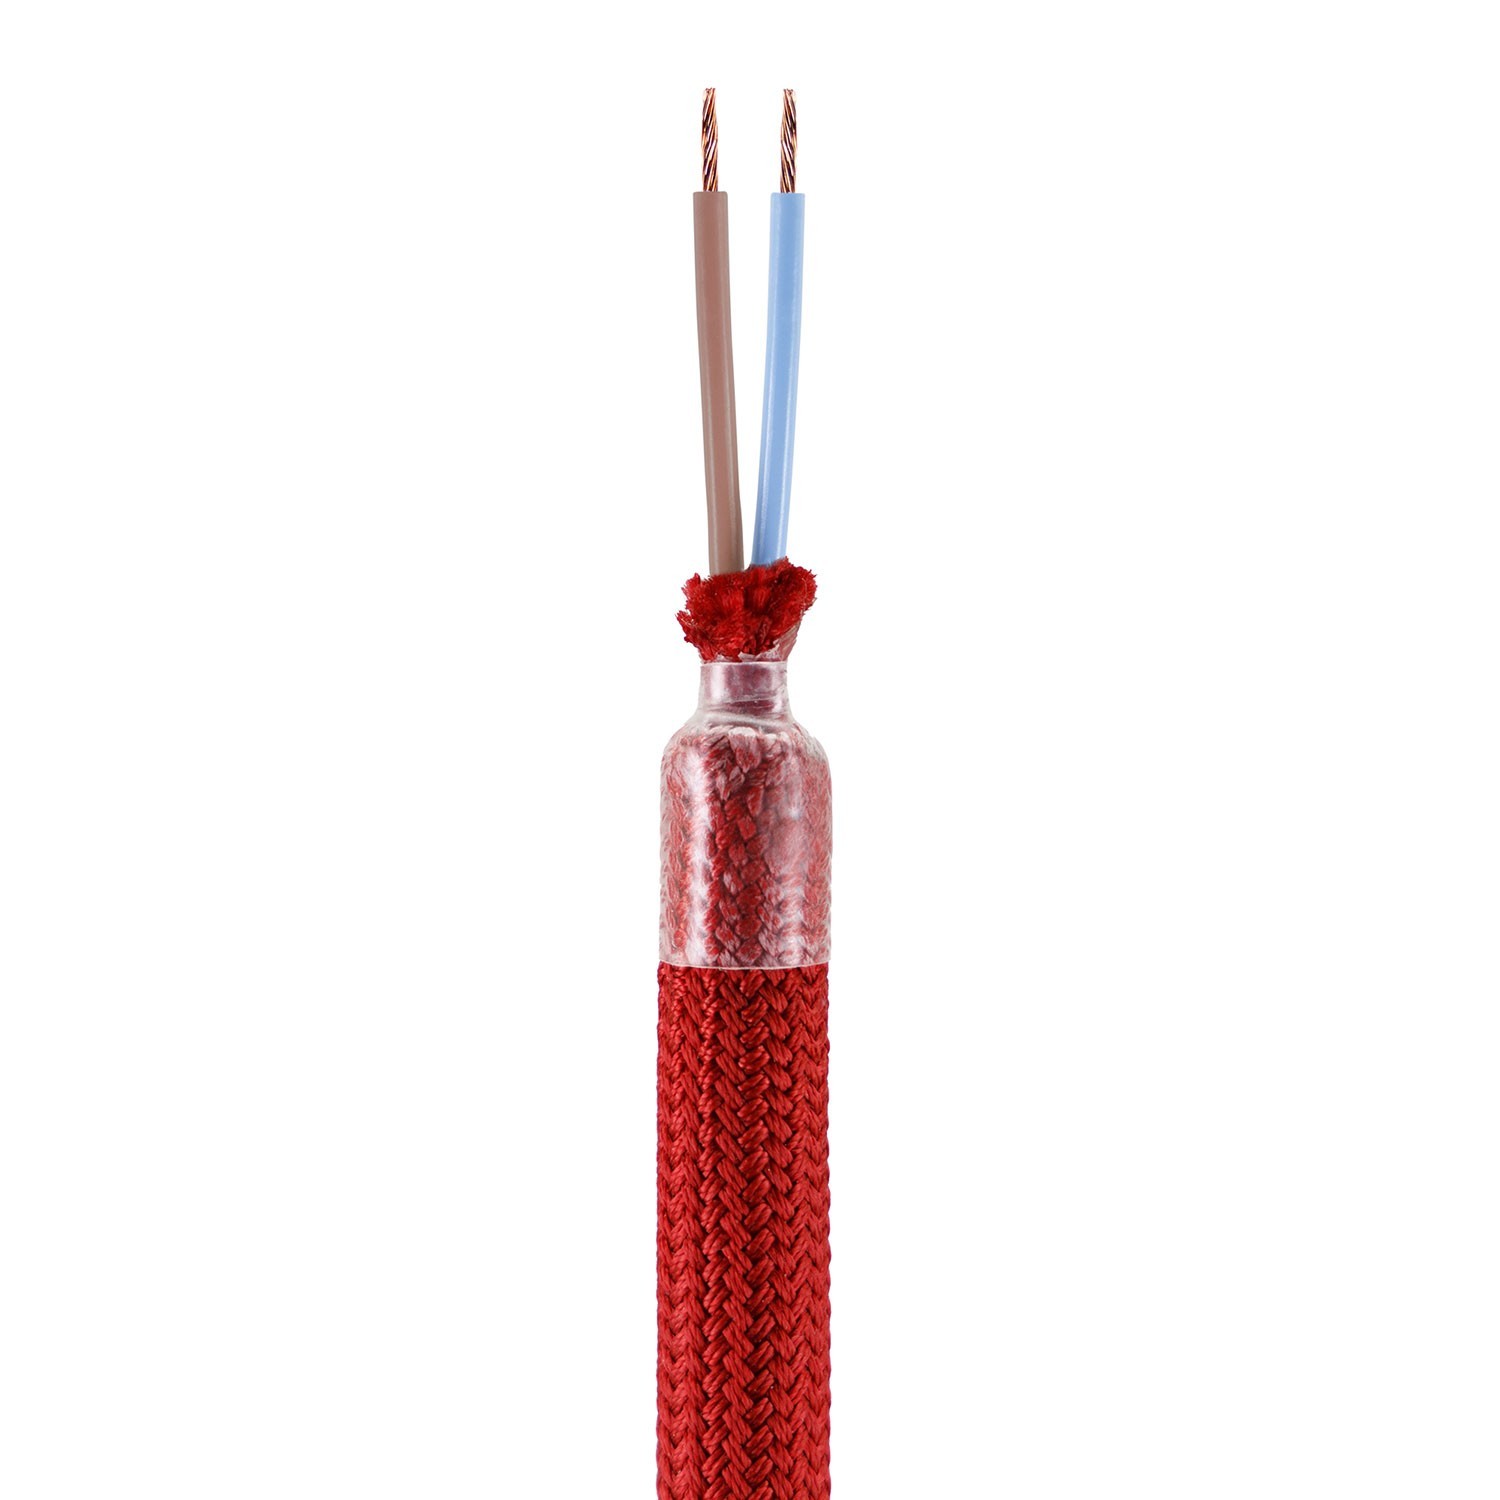 Creative Flex flexible tube covered in Red RM09 fabric